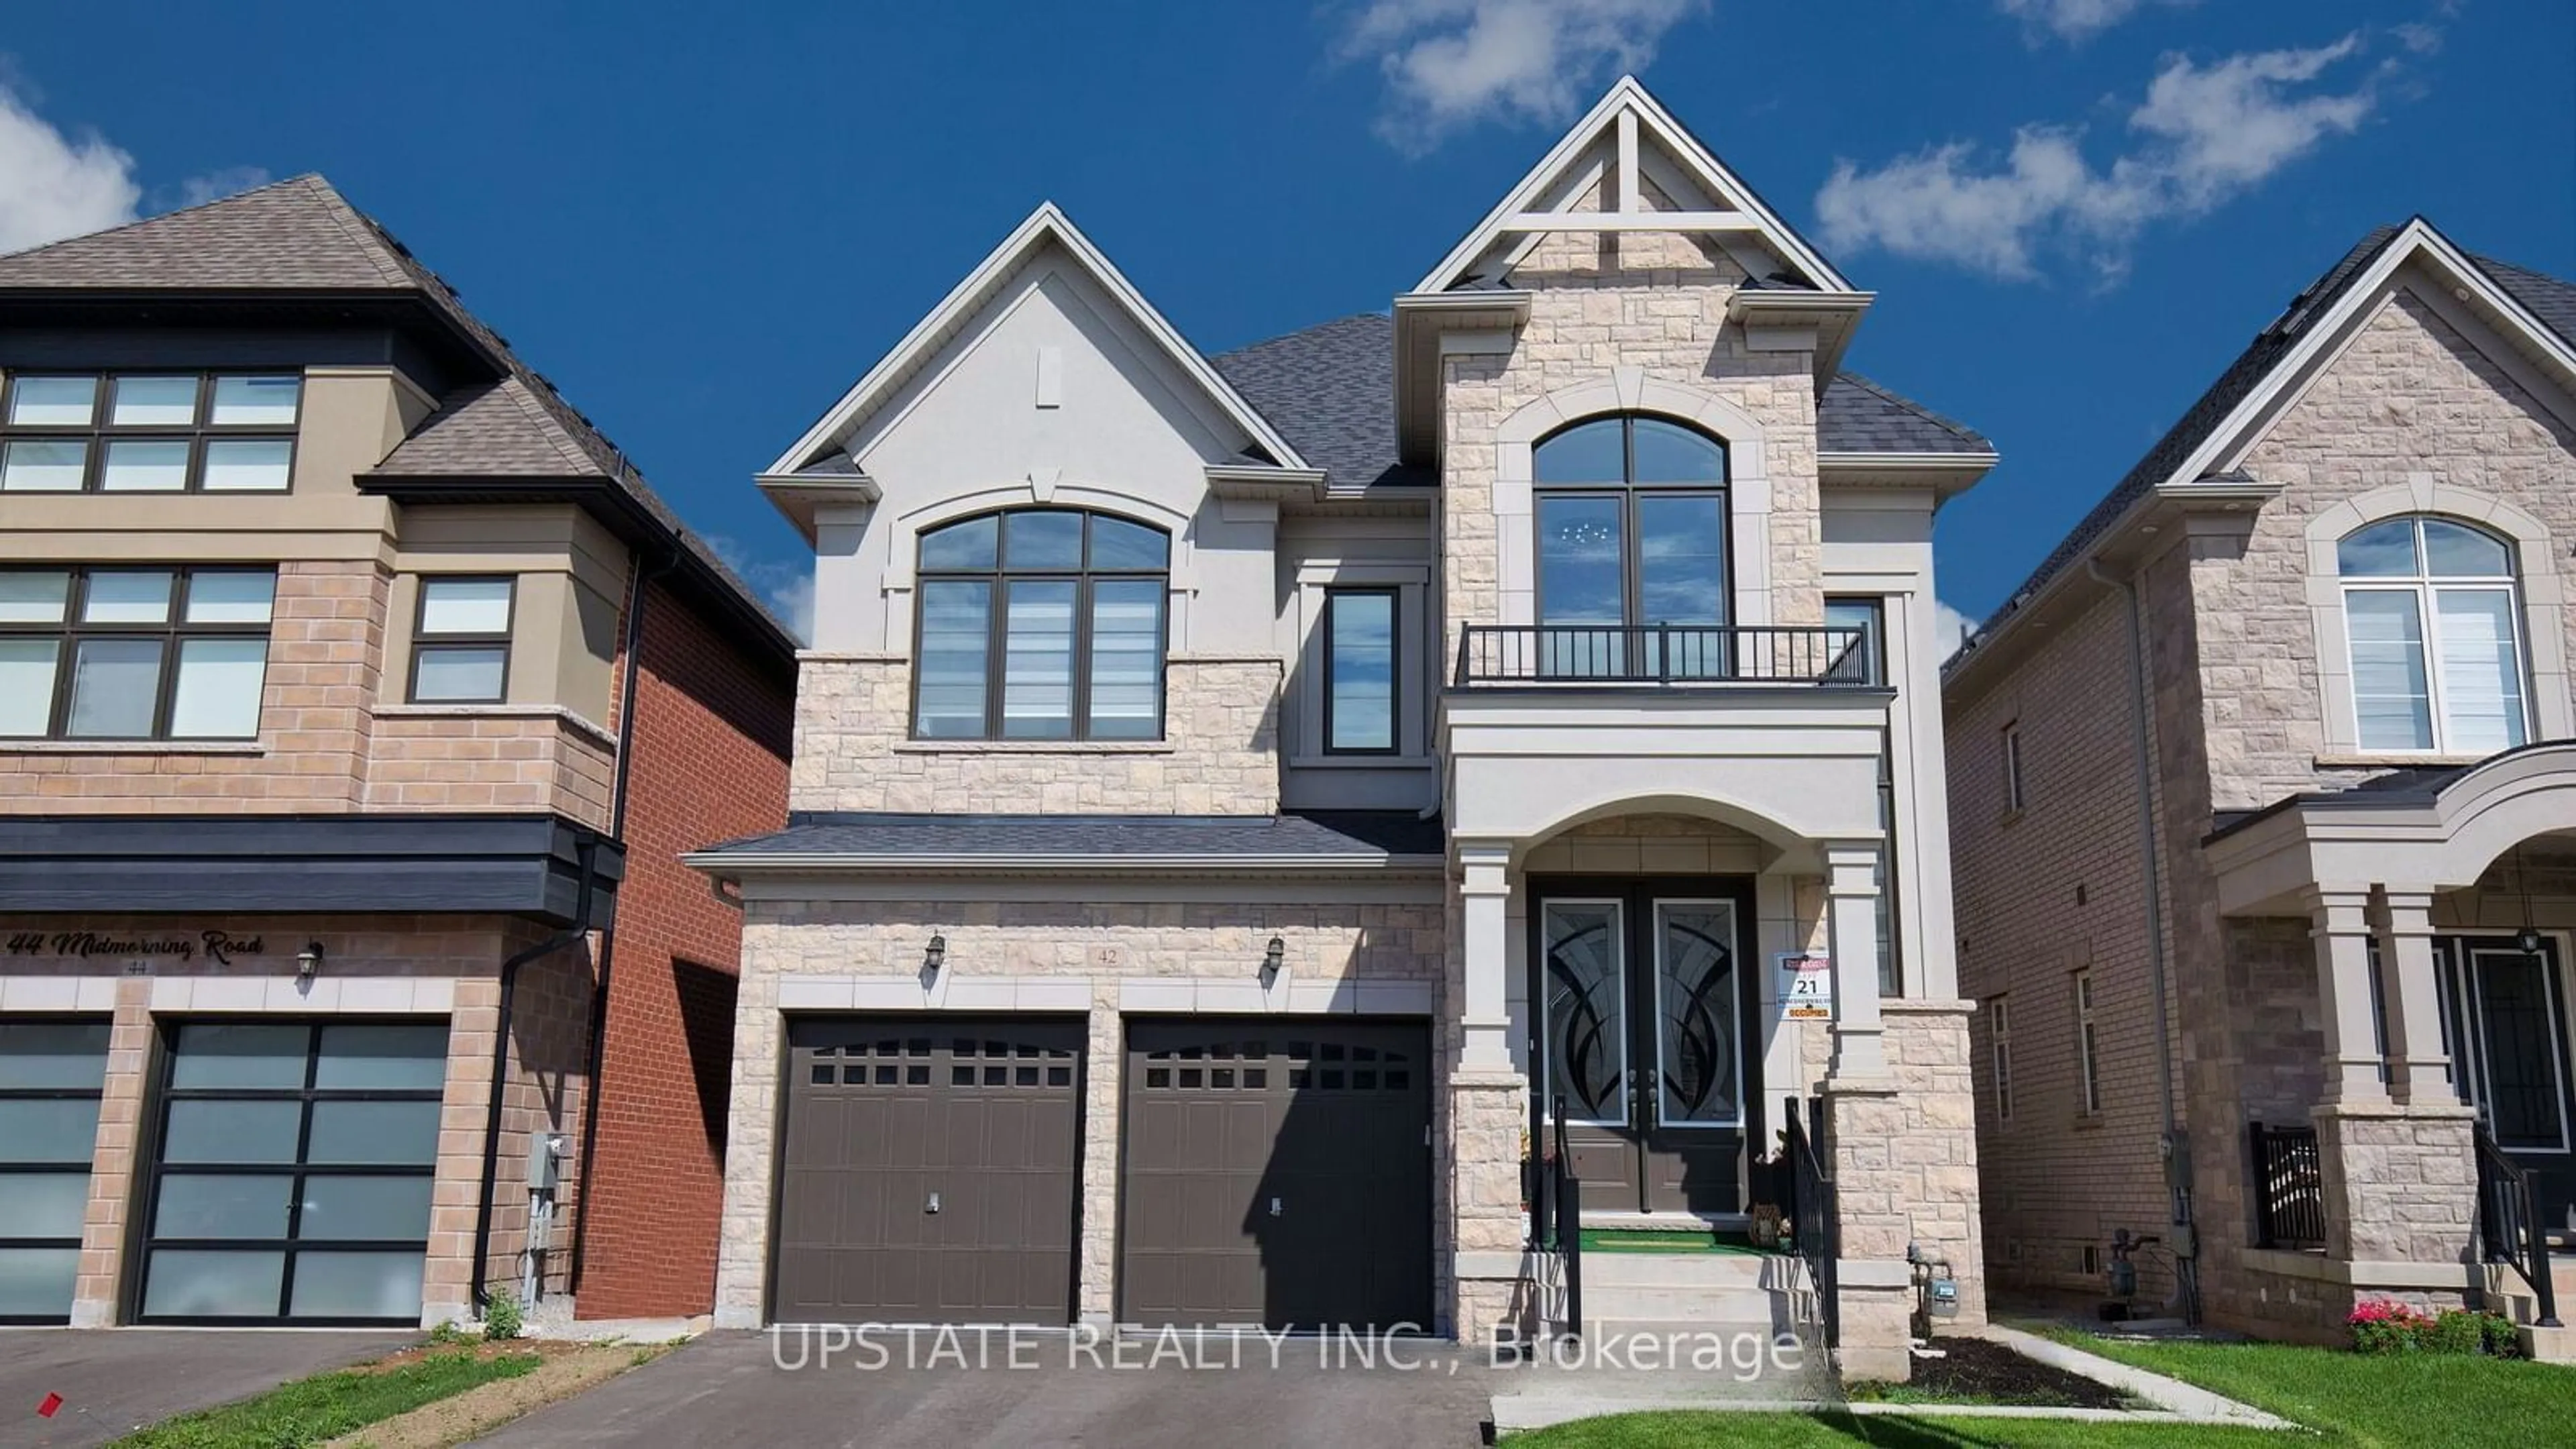 Home with brick exterior material for 42 Midmorning Rd, Brampton Ontario L6X 5R5